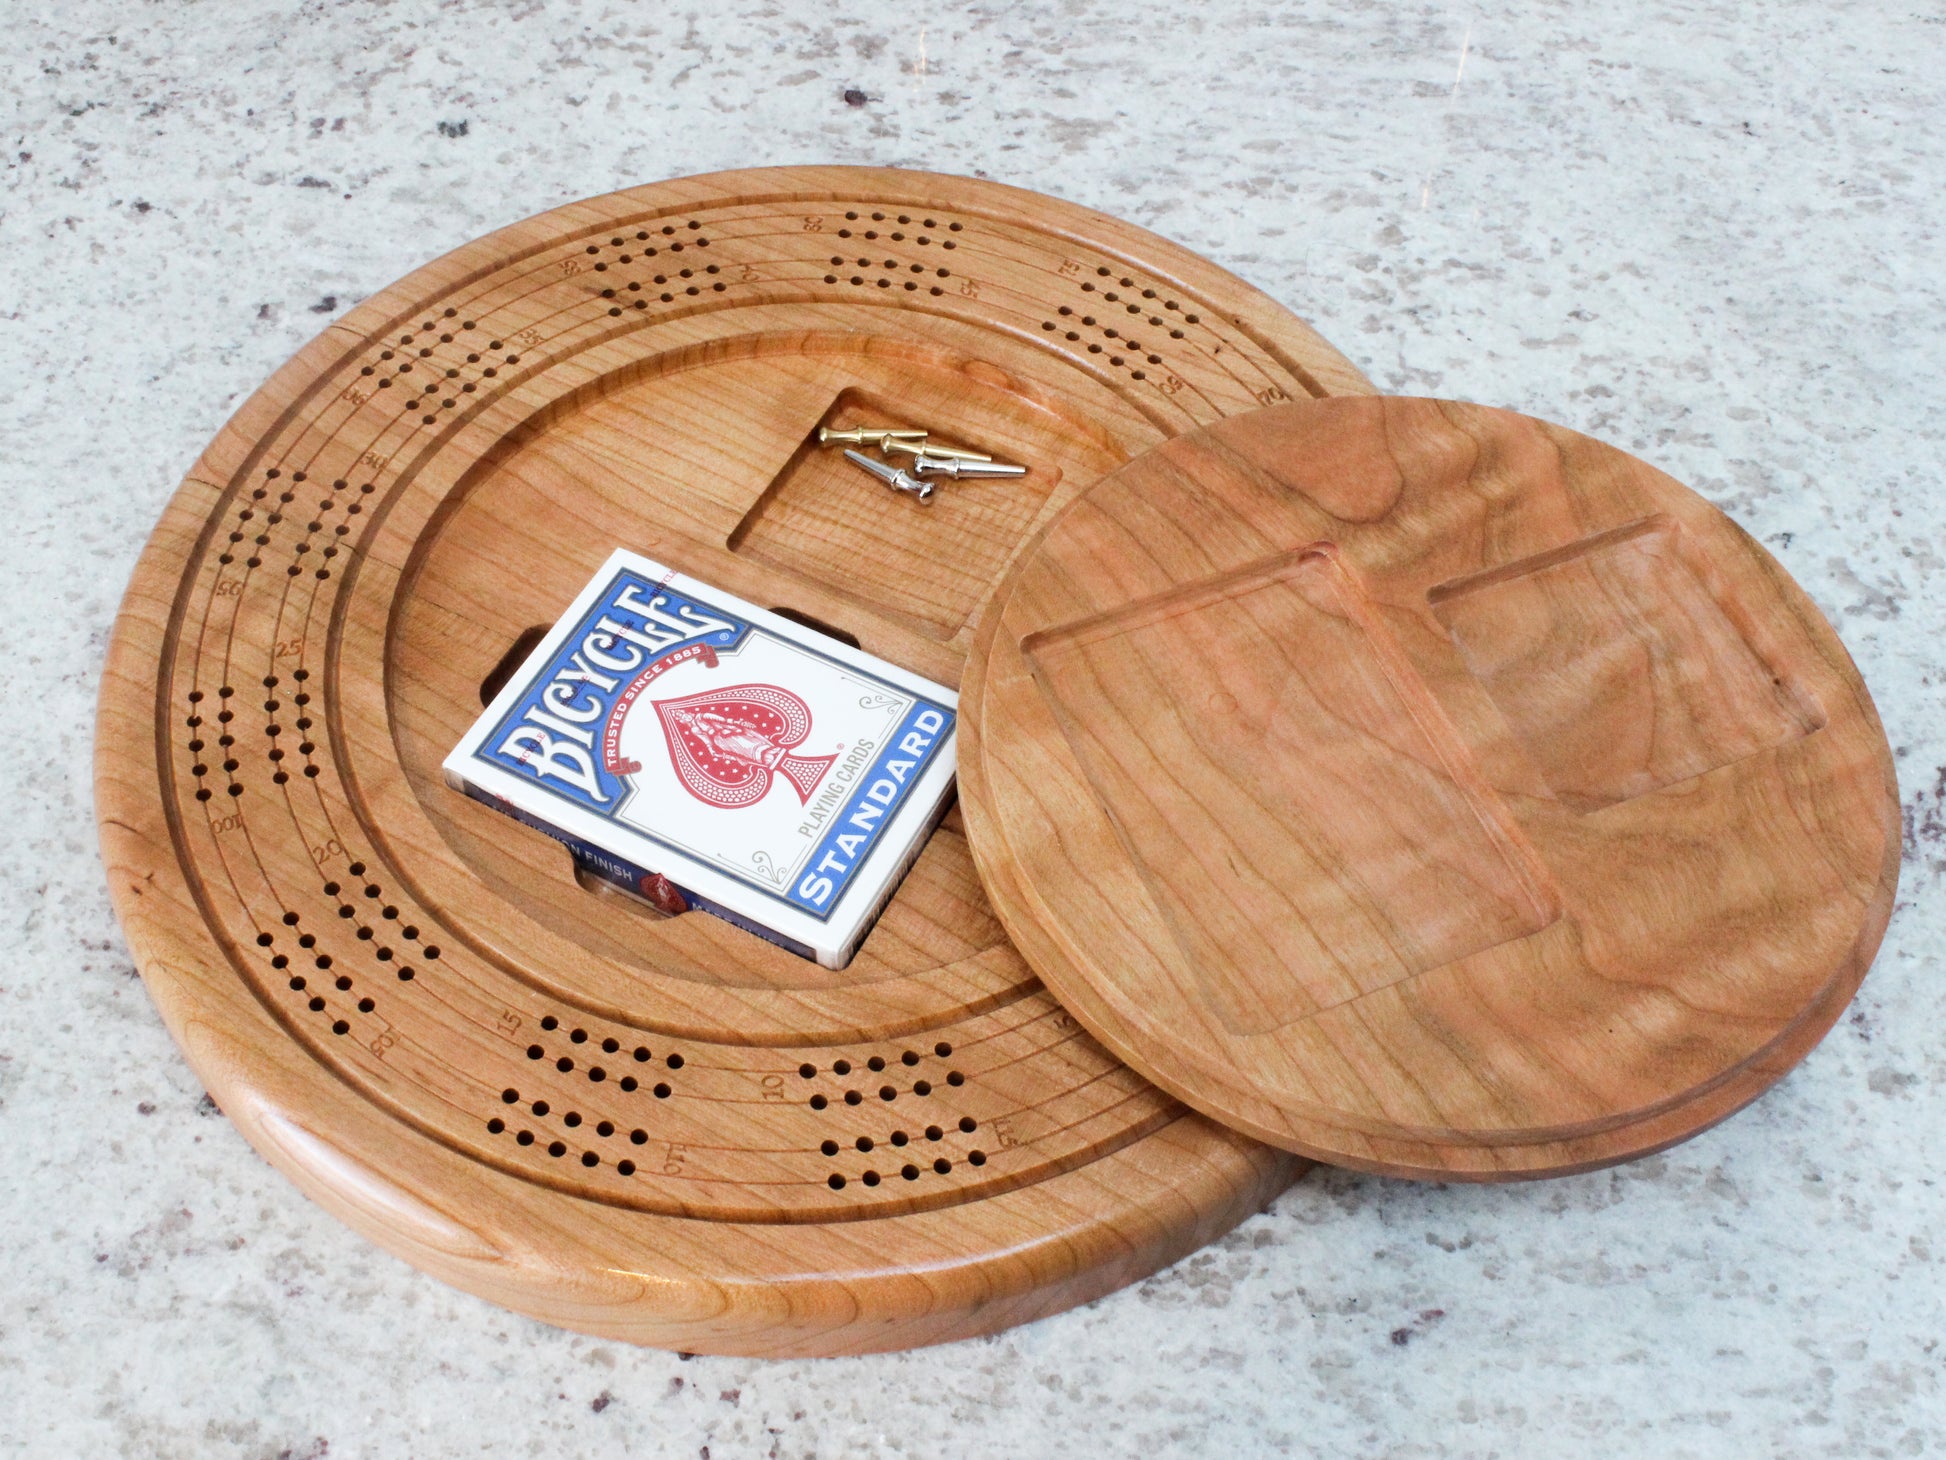 Round cherry wood cribbage board including a fresh deck of cards and token pins